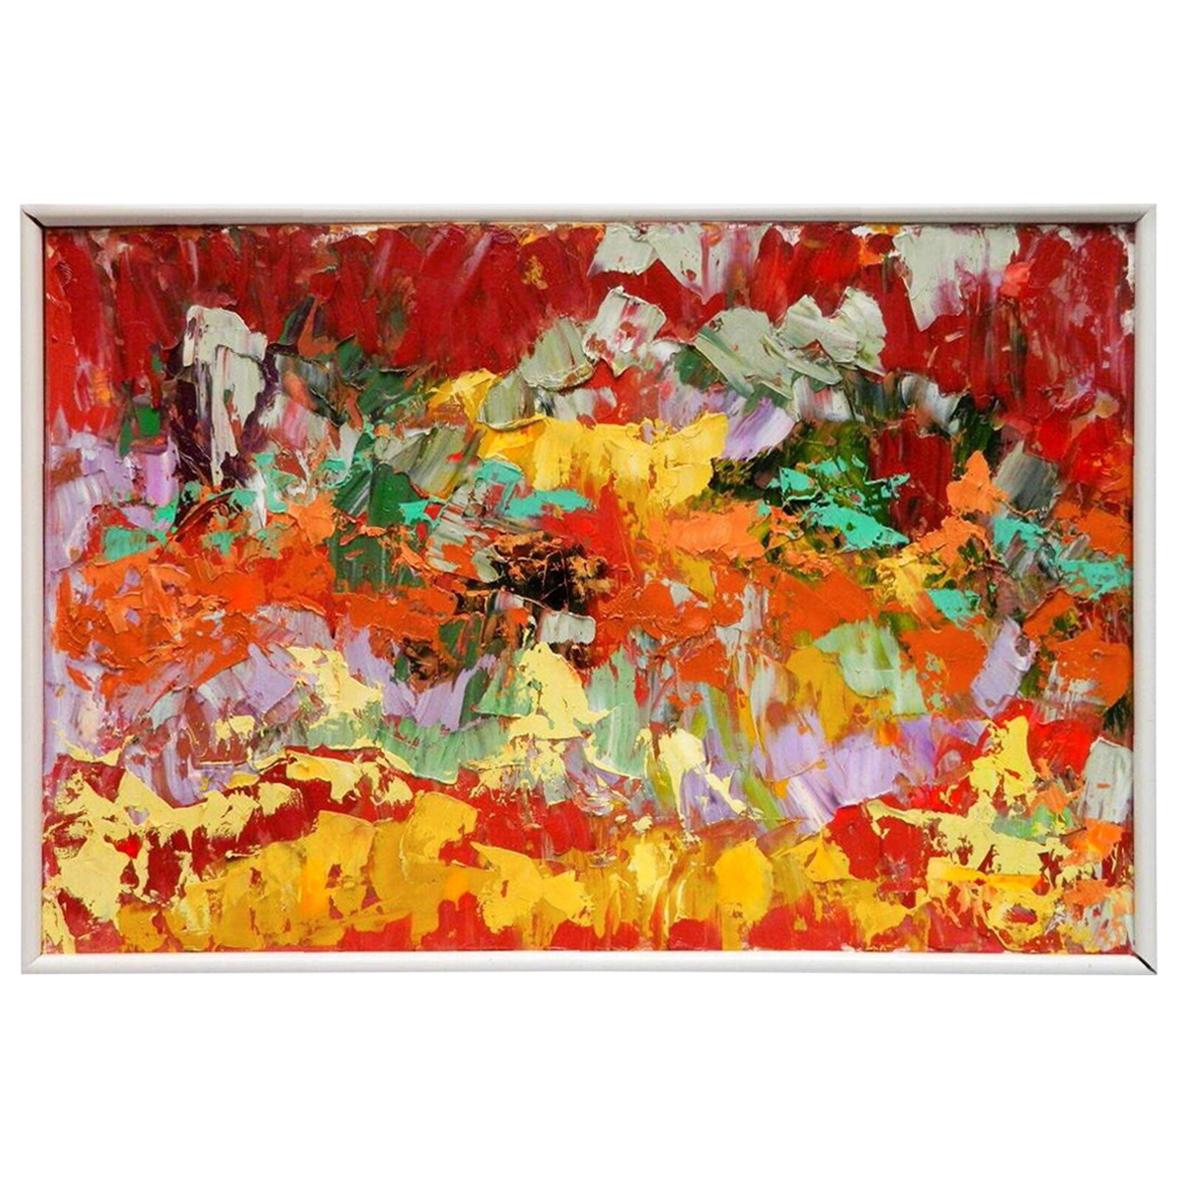 Postmodern Abstraction oil on canvas, Arnold Schreibman, 1991, Red yellow green For Sale